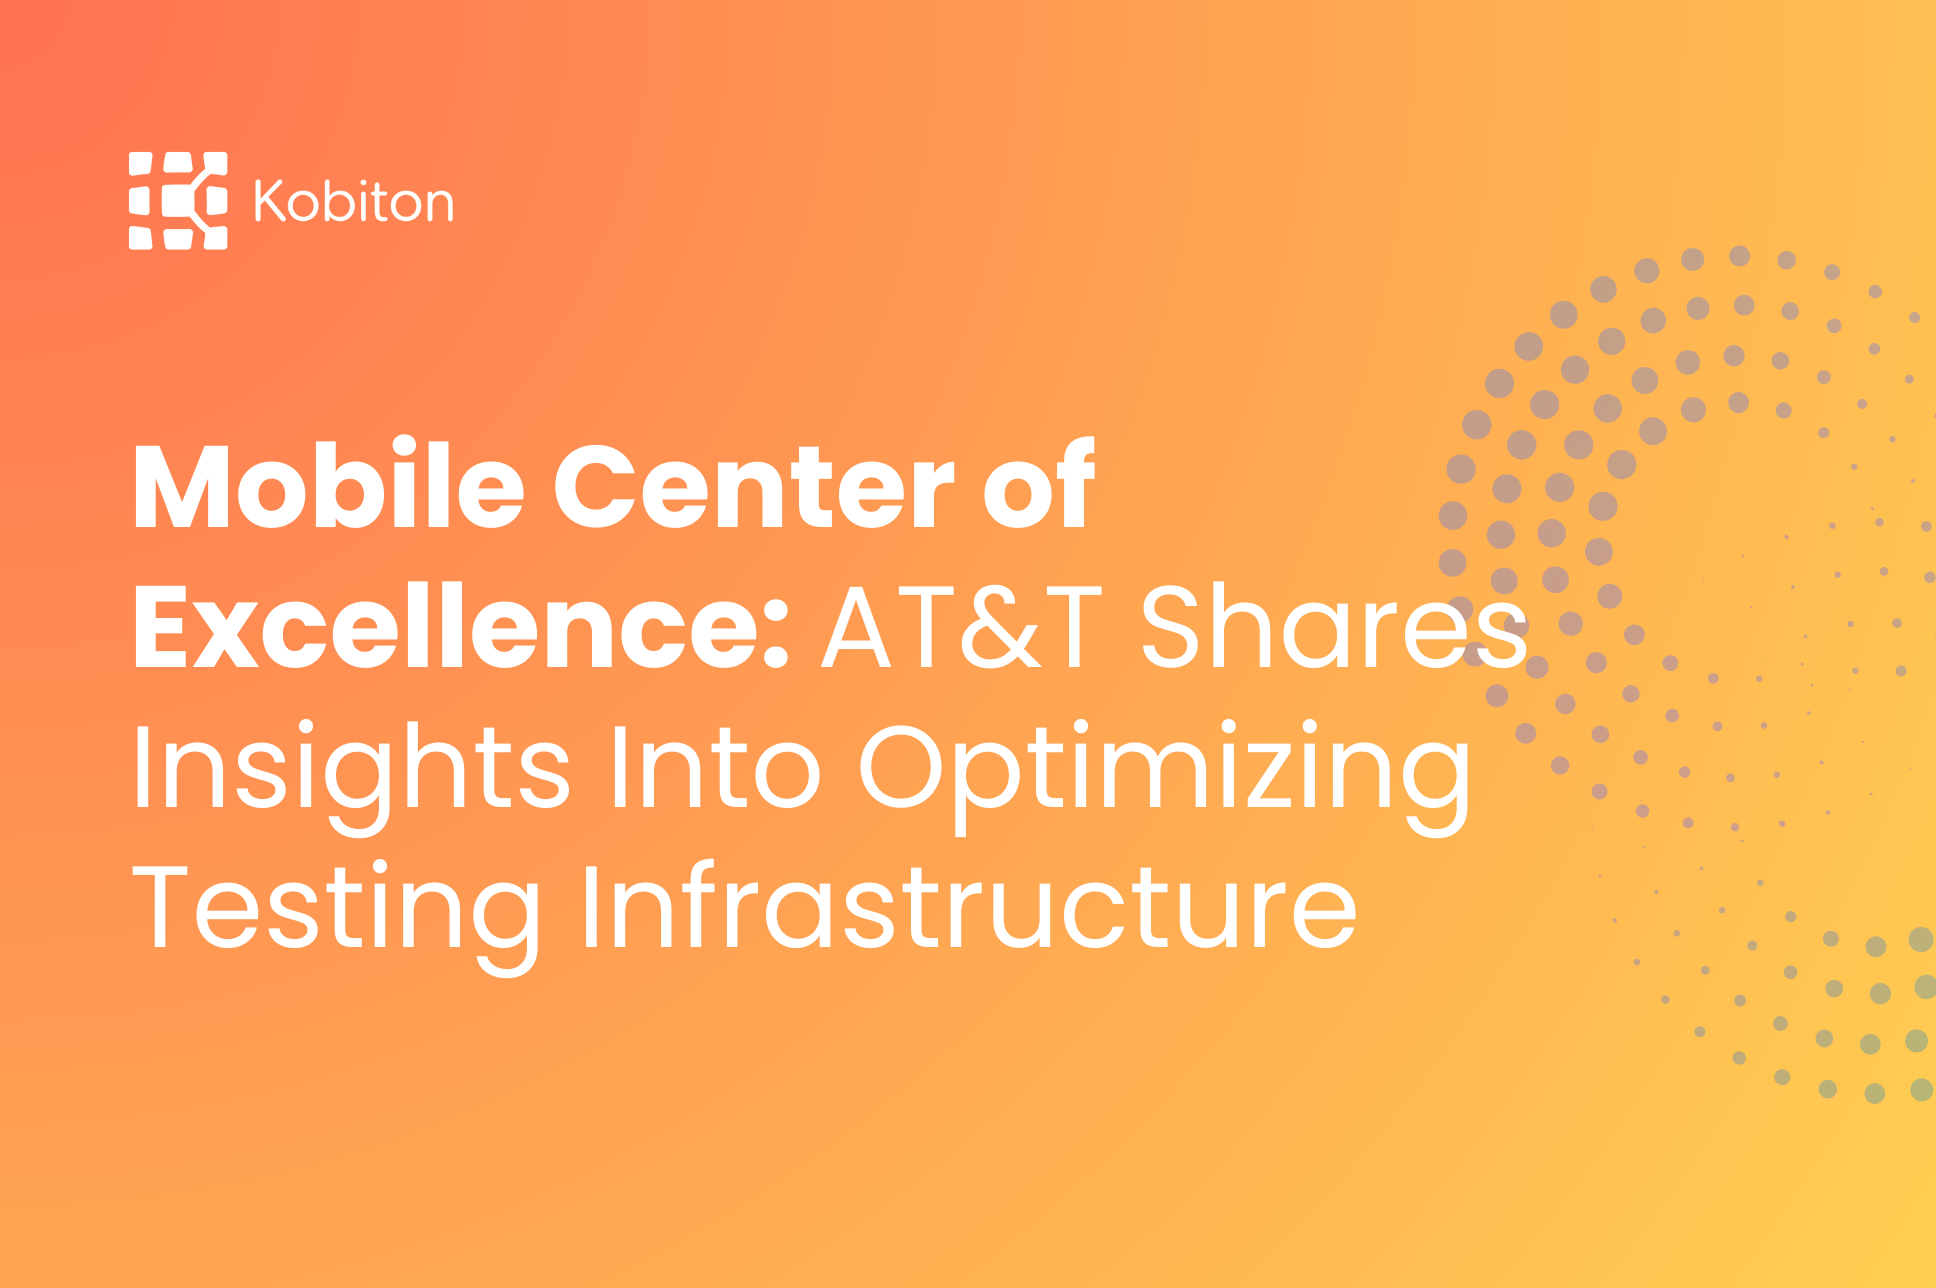 Mobile Center of Excellence: AT&T Shares Insights Into Optimizing Testing Infrastructure